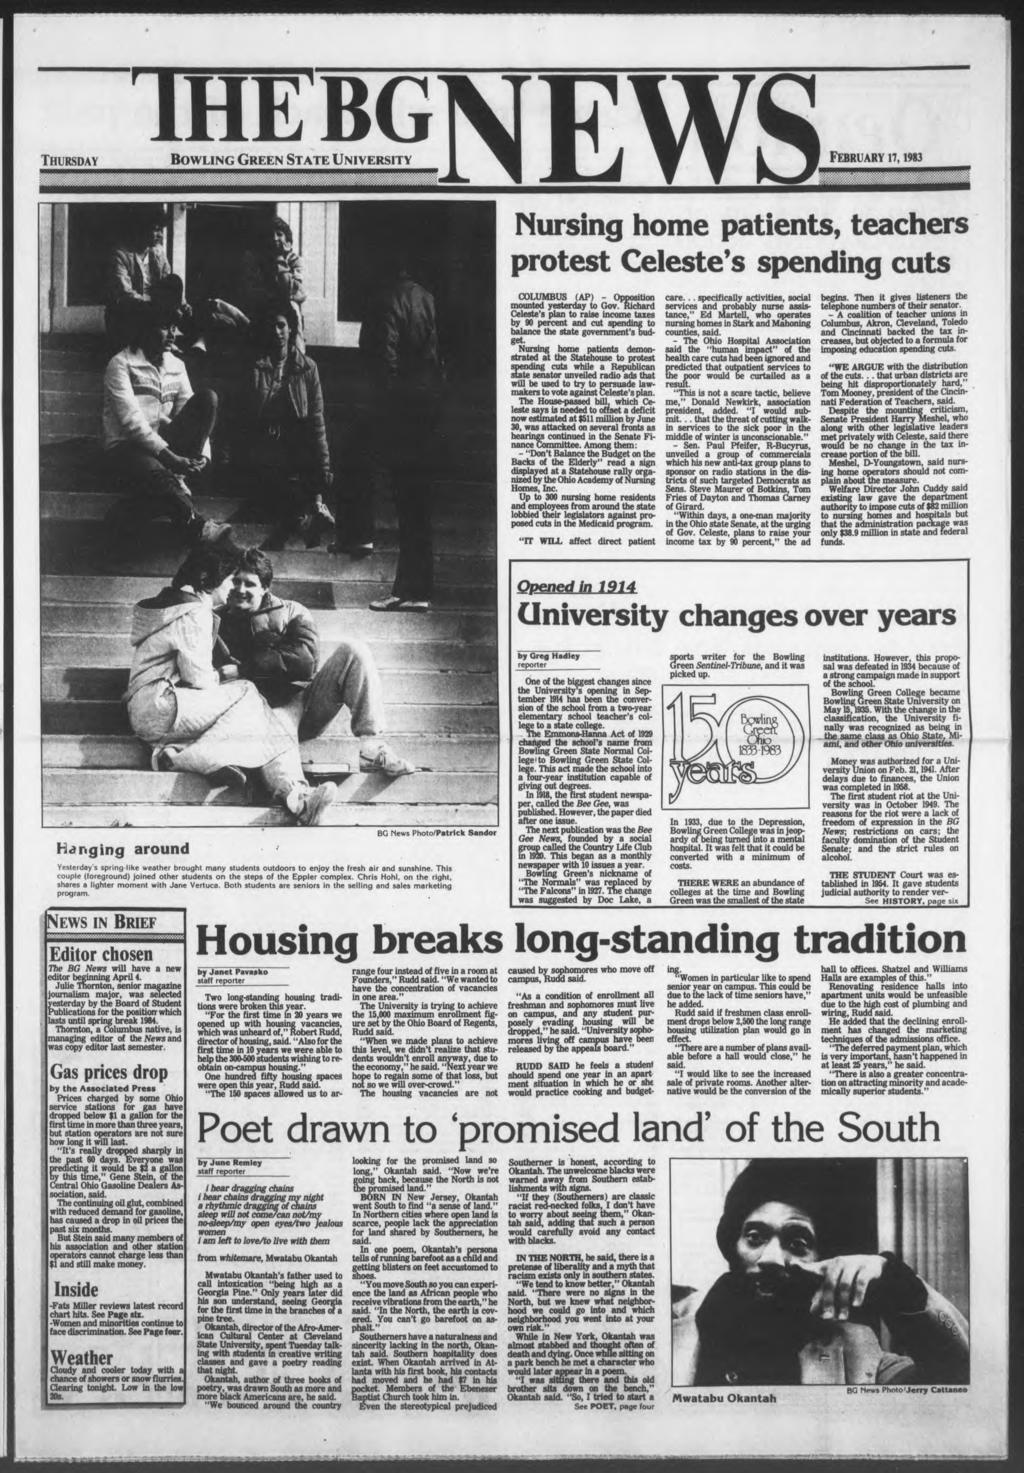 THE THURSDAY wmmmmmmm BOWLNG GREEN STATE UNVERSTY FEBRUARY T, 1983 PUP Nursng home patents, teachers protest Celeste's spendng cuts COLUMBUS (AP) - Opposton mounted yesterday to Gov.